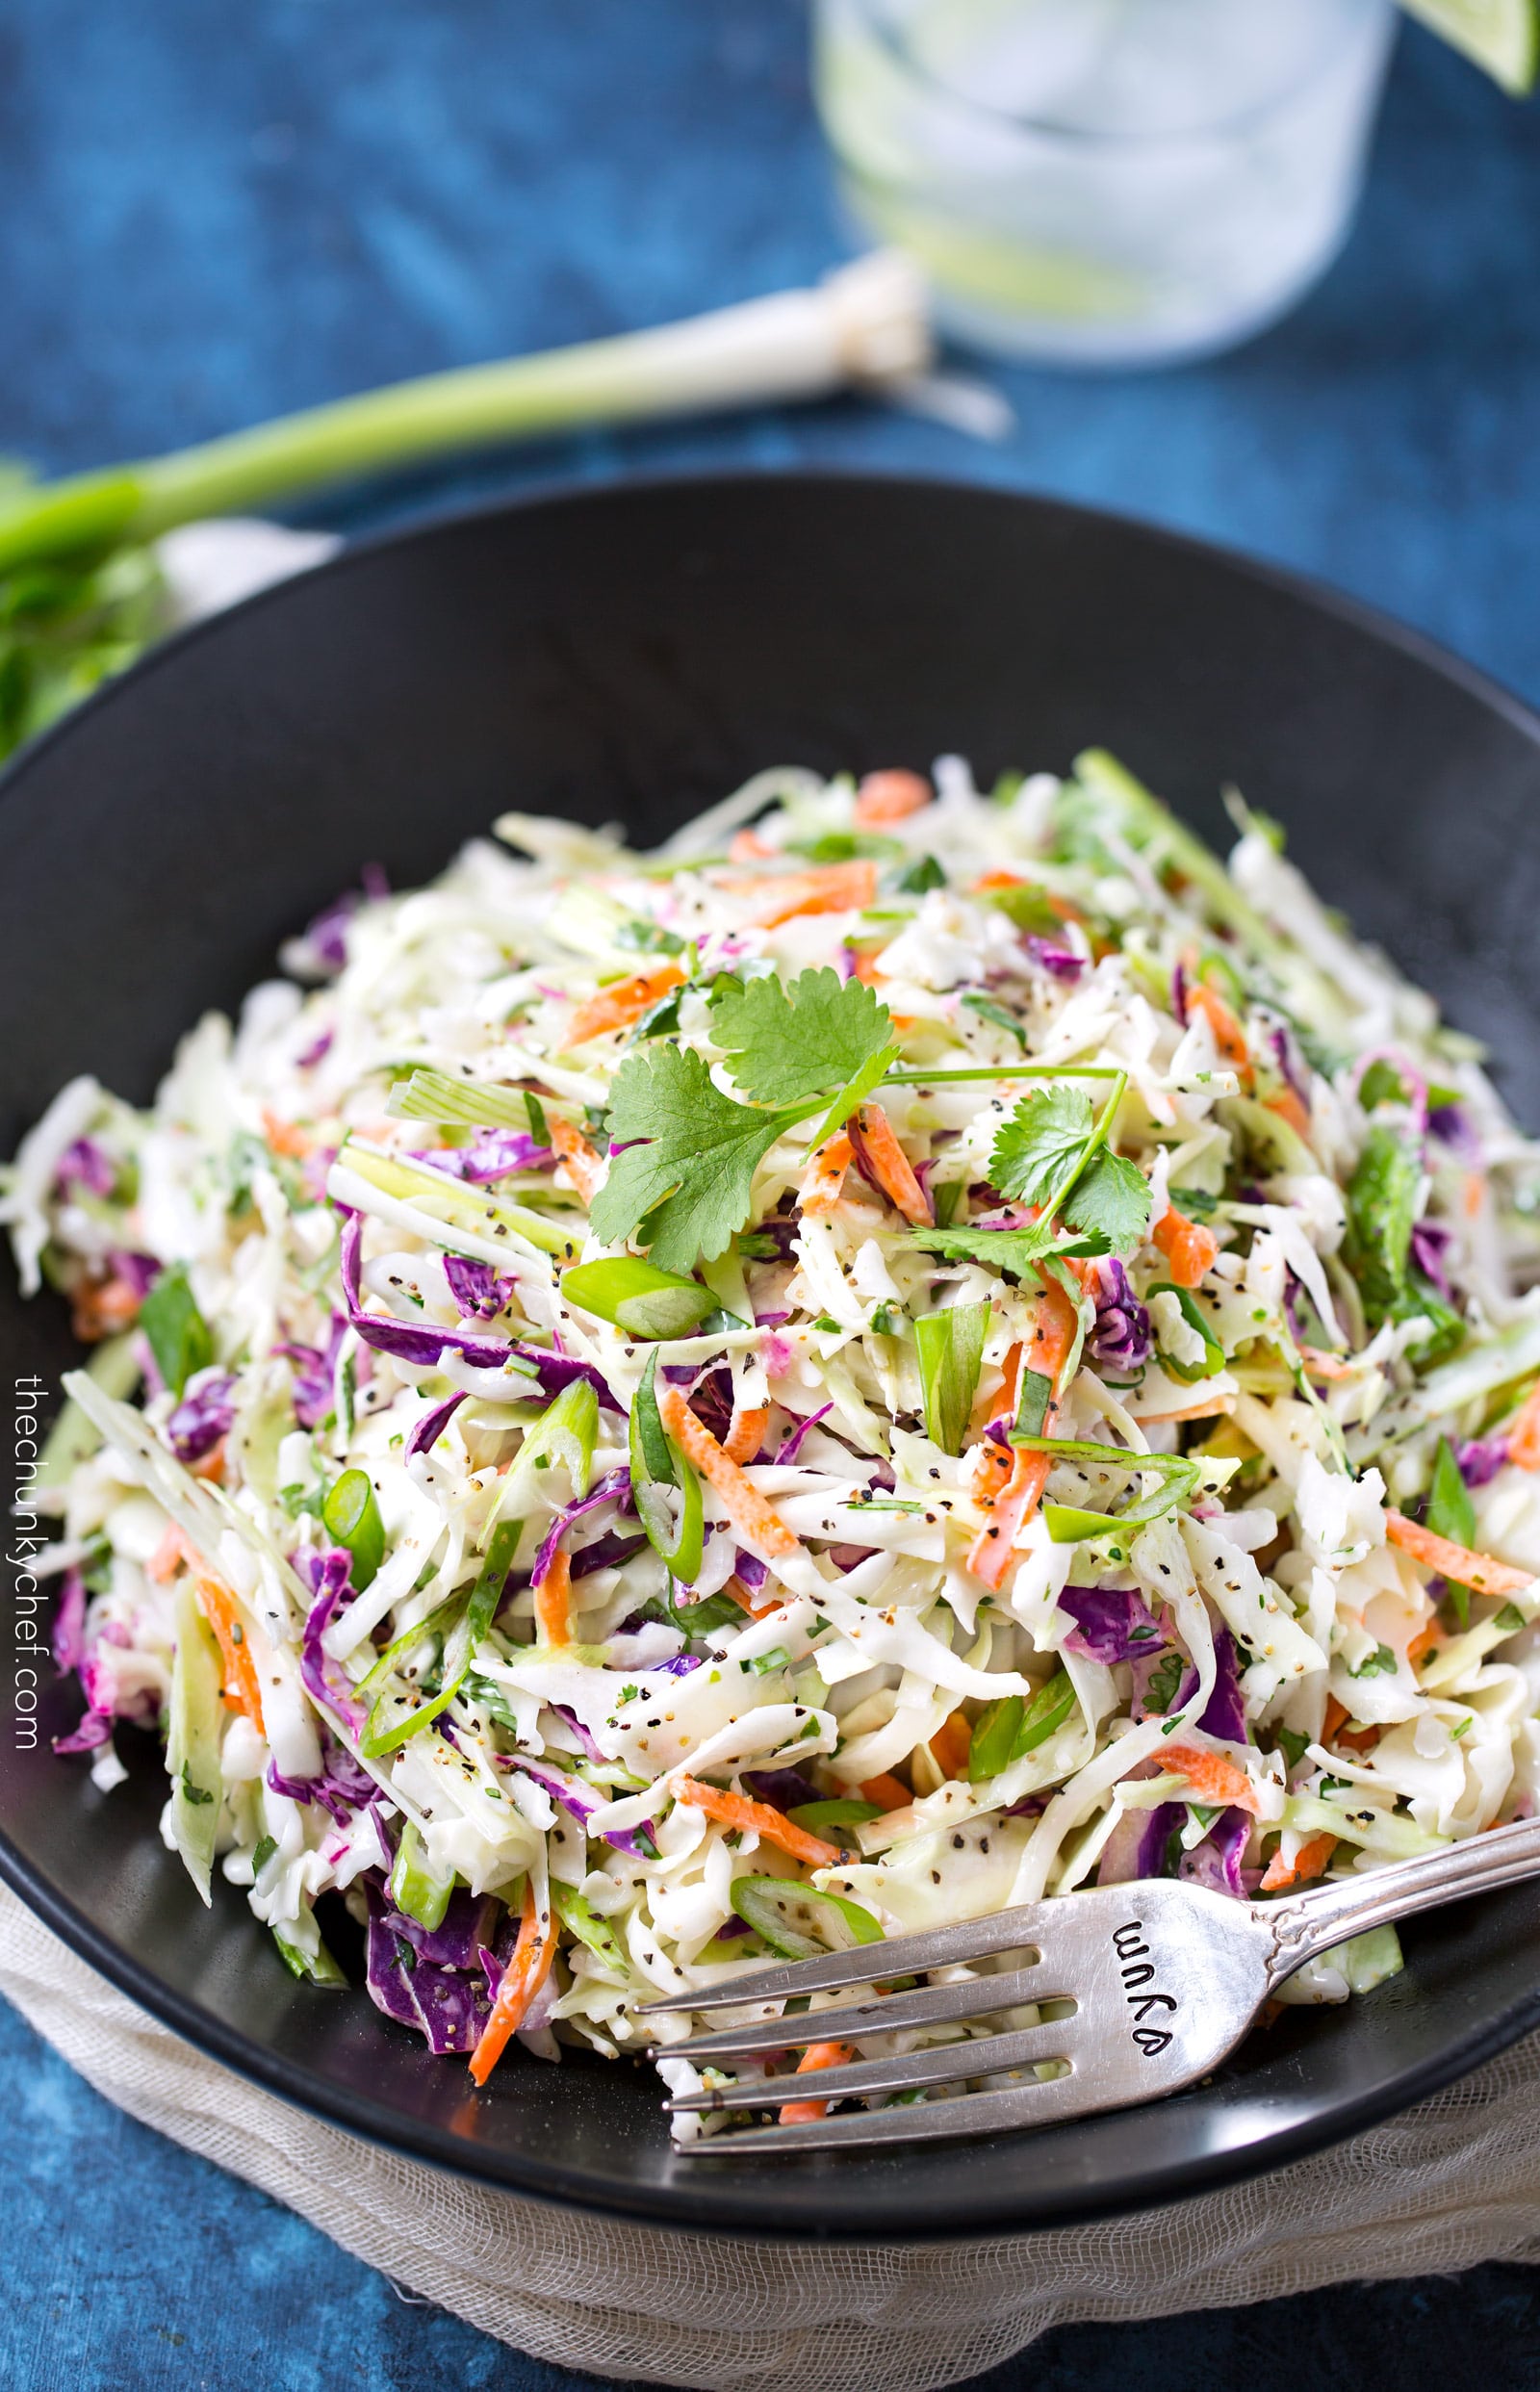 5 Minute Tequila Lime Coleslaw with Cilantro - The Chunky Chef